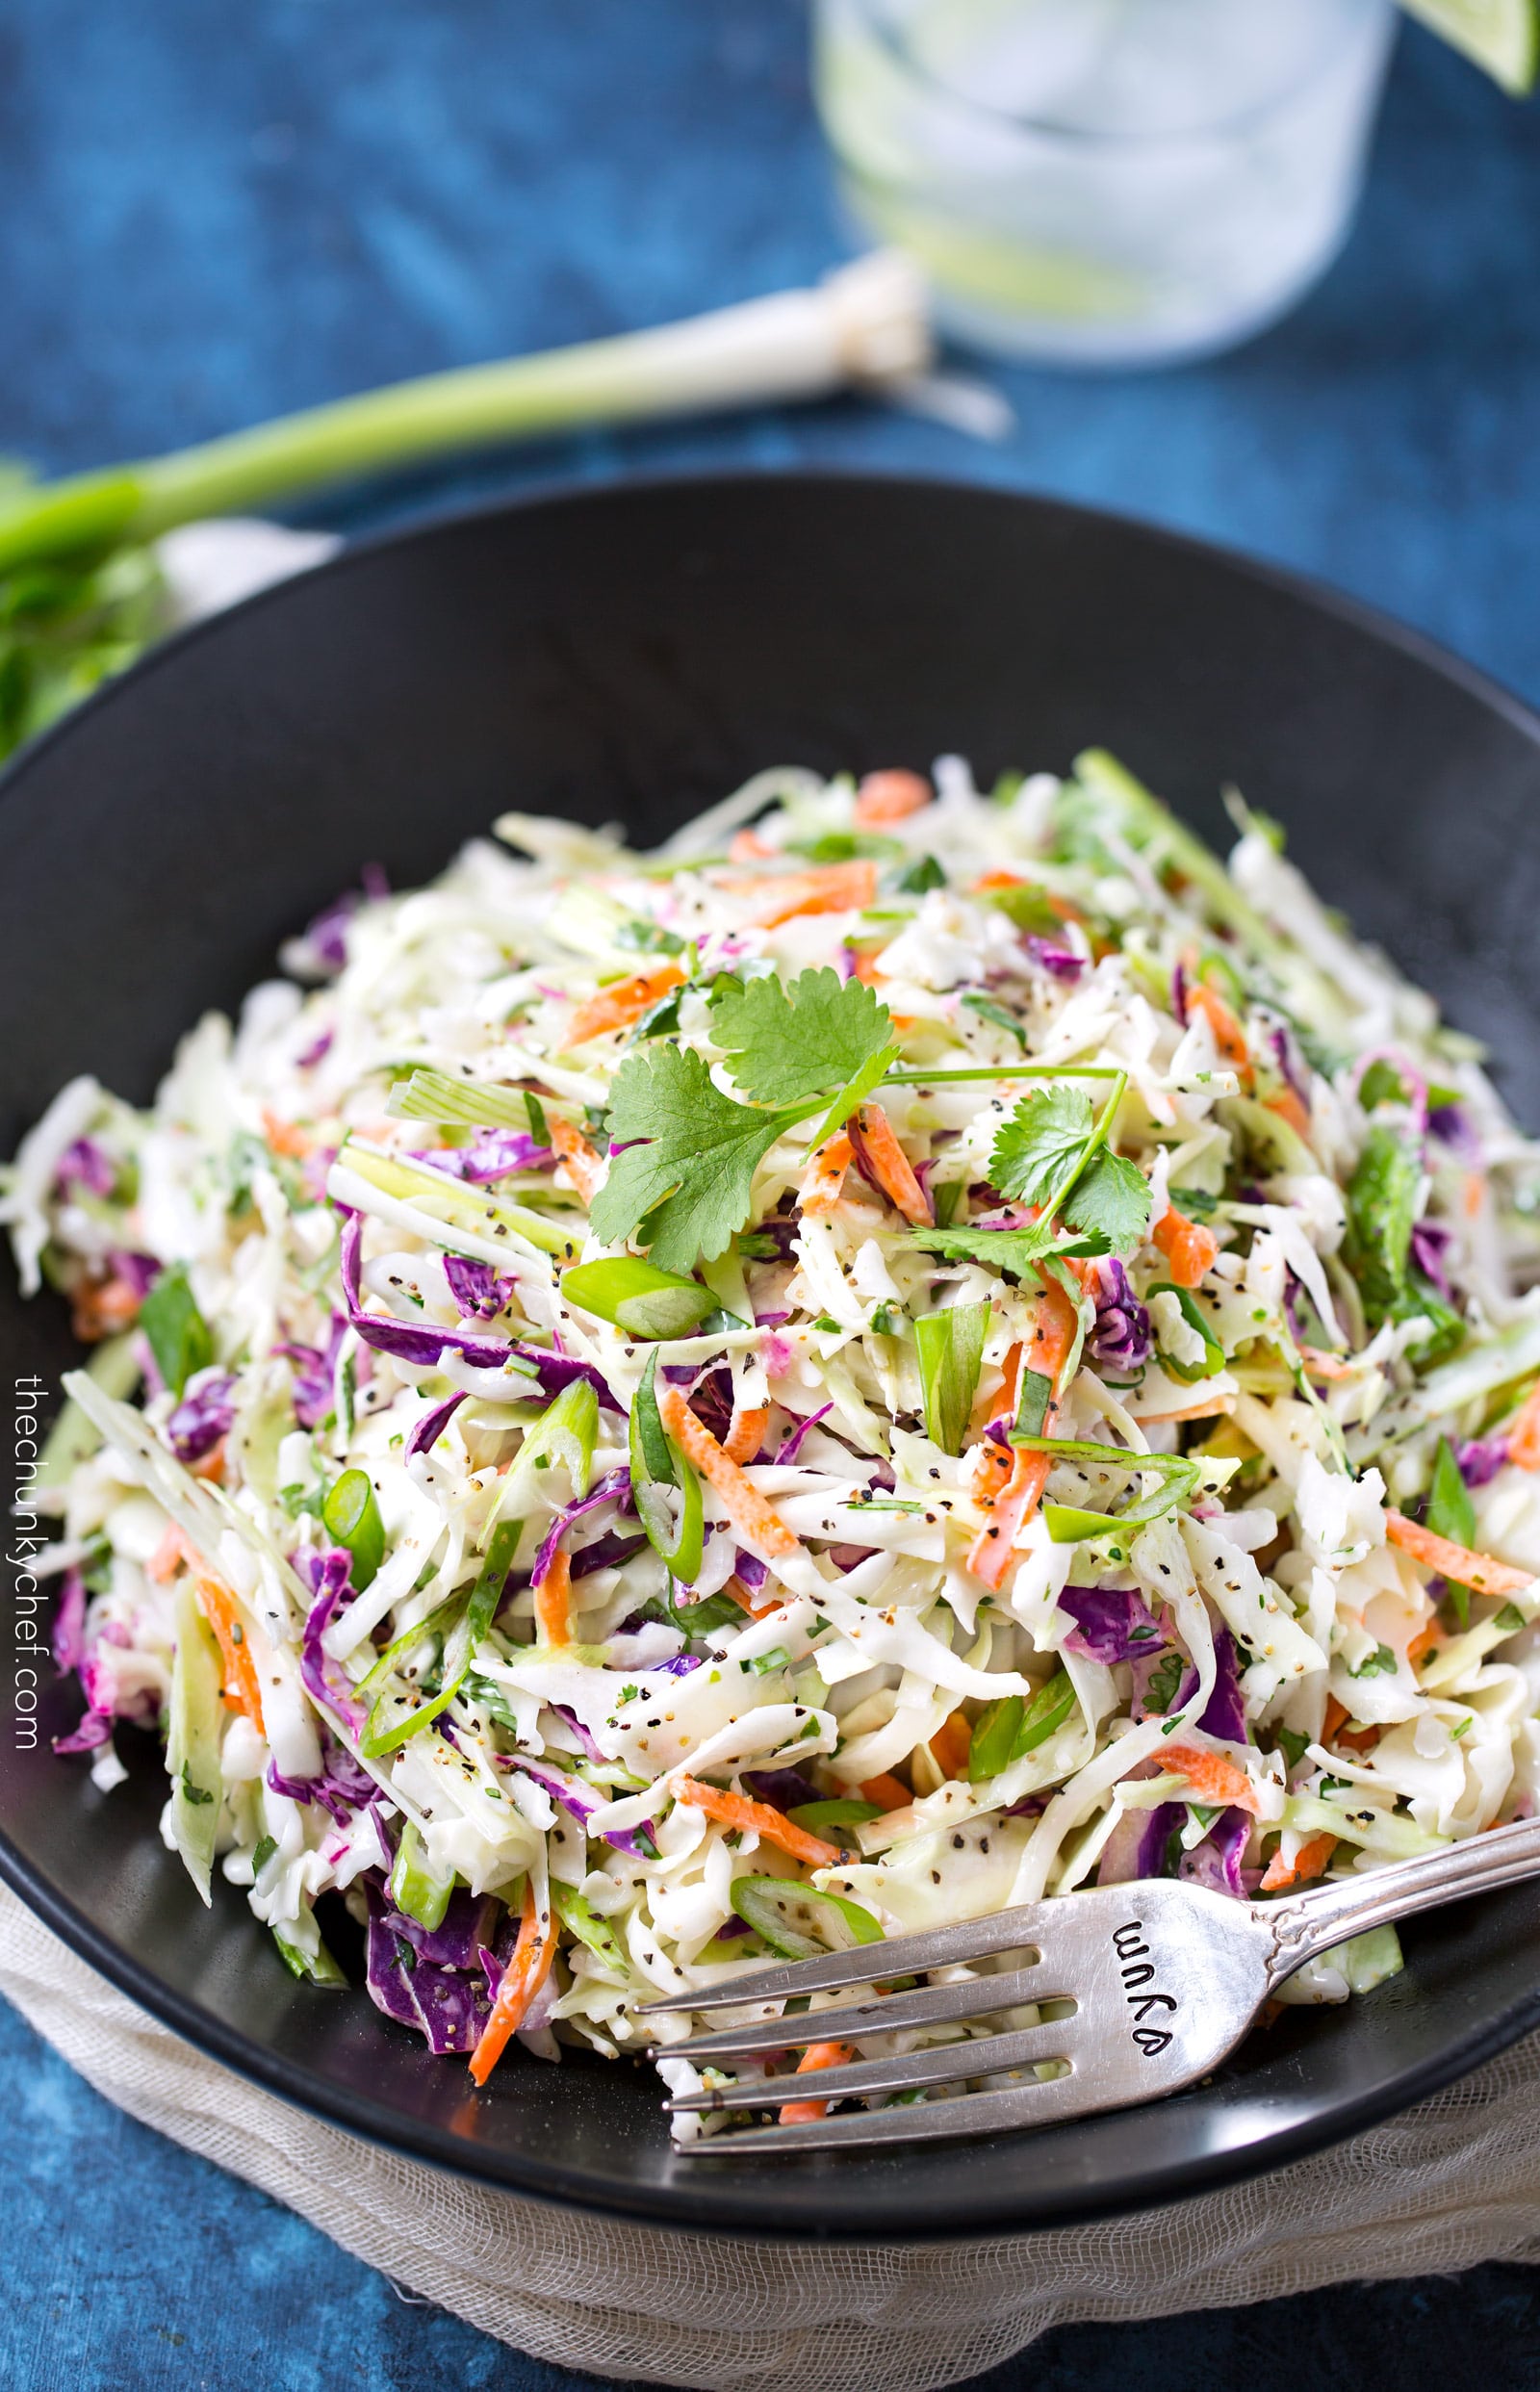 5 Minute Tequila Lime Coleslaw with Cilantro - The Chunky Chef